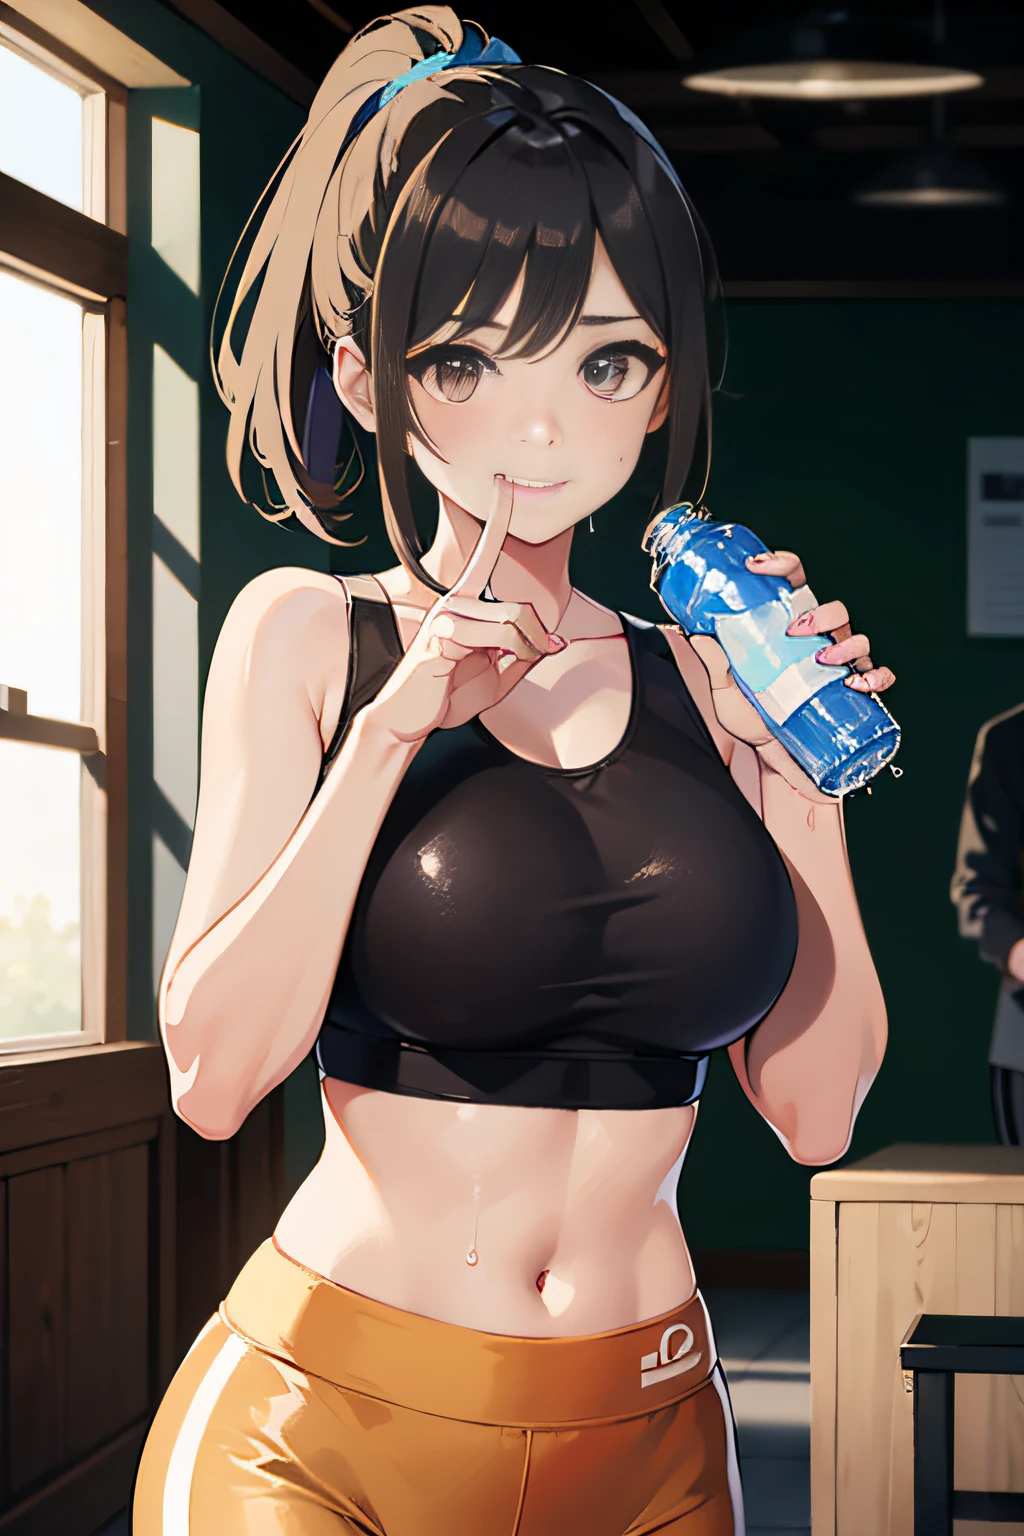 Girl running in the park,(((Drink bottled water))),Jade sweat,(Expressed  with a glossy iridescent metallic luster、Bright sports bra and  leggings.:1.3).Glossy light brown and orange striped shorthair,disheveled  ponytail - SeaArt AI